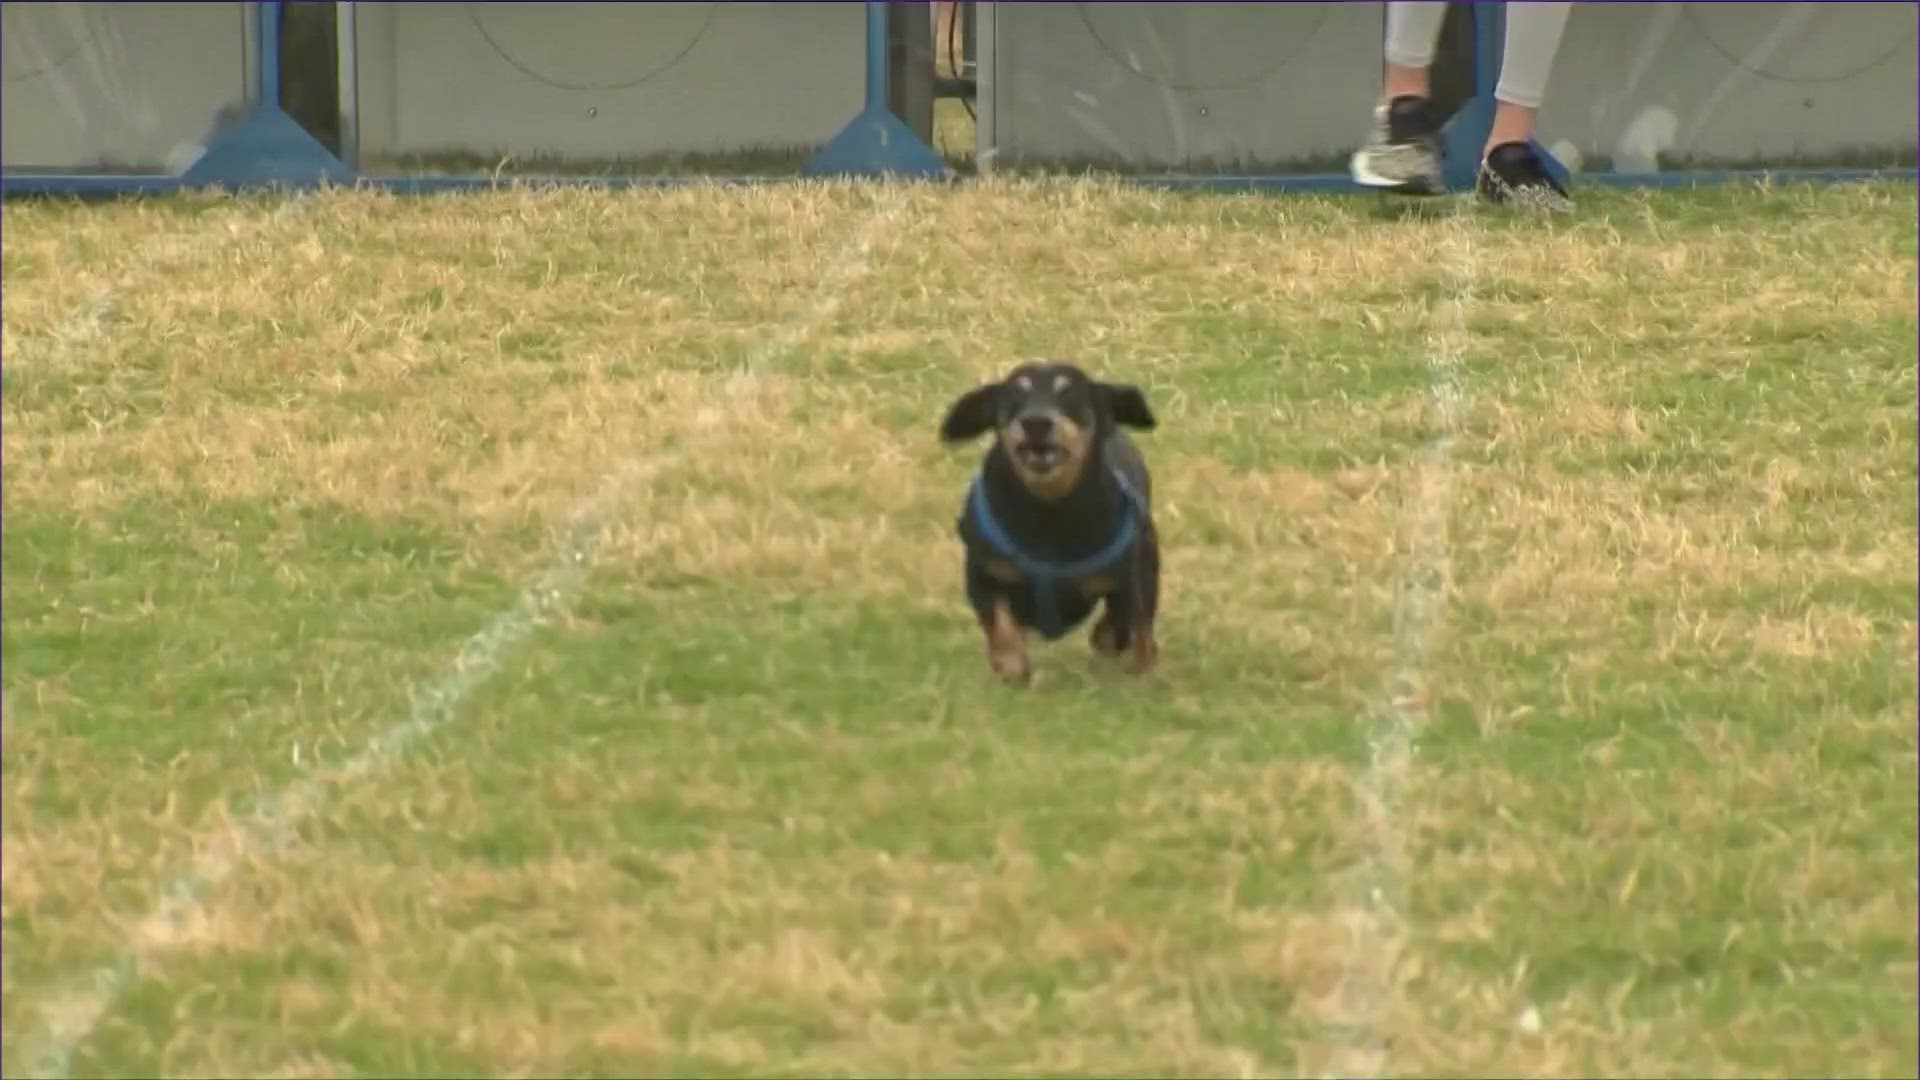 The 26th annual Wiener Dog Races is a fundraiser for the Buda Lion's Club. The event had barbecue cookoffs, live music, arts and crafts and games for kids.